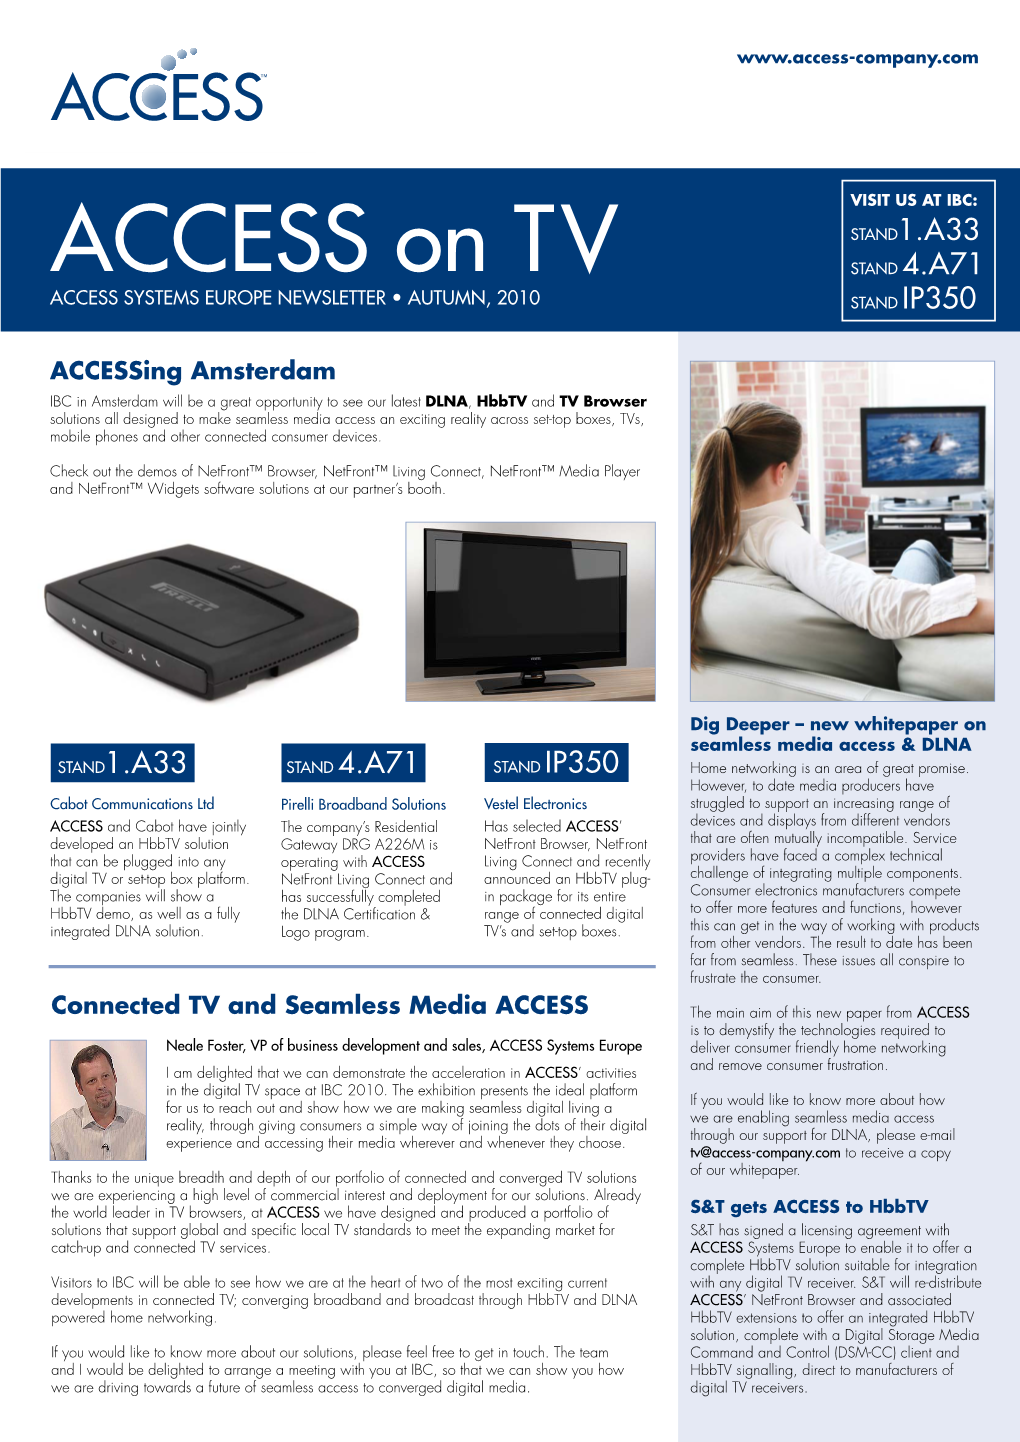 ACCESS on TV STAND 4.A71 ACCESS SYSTEMS EUROPE NEWSLETTER • AUTUMN, 2010 STAND IP350